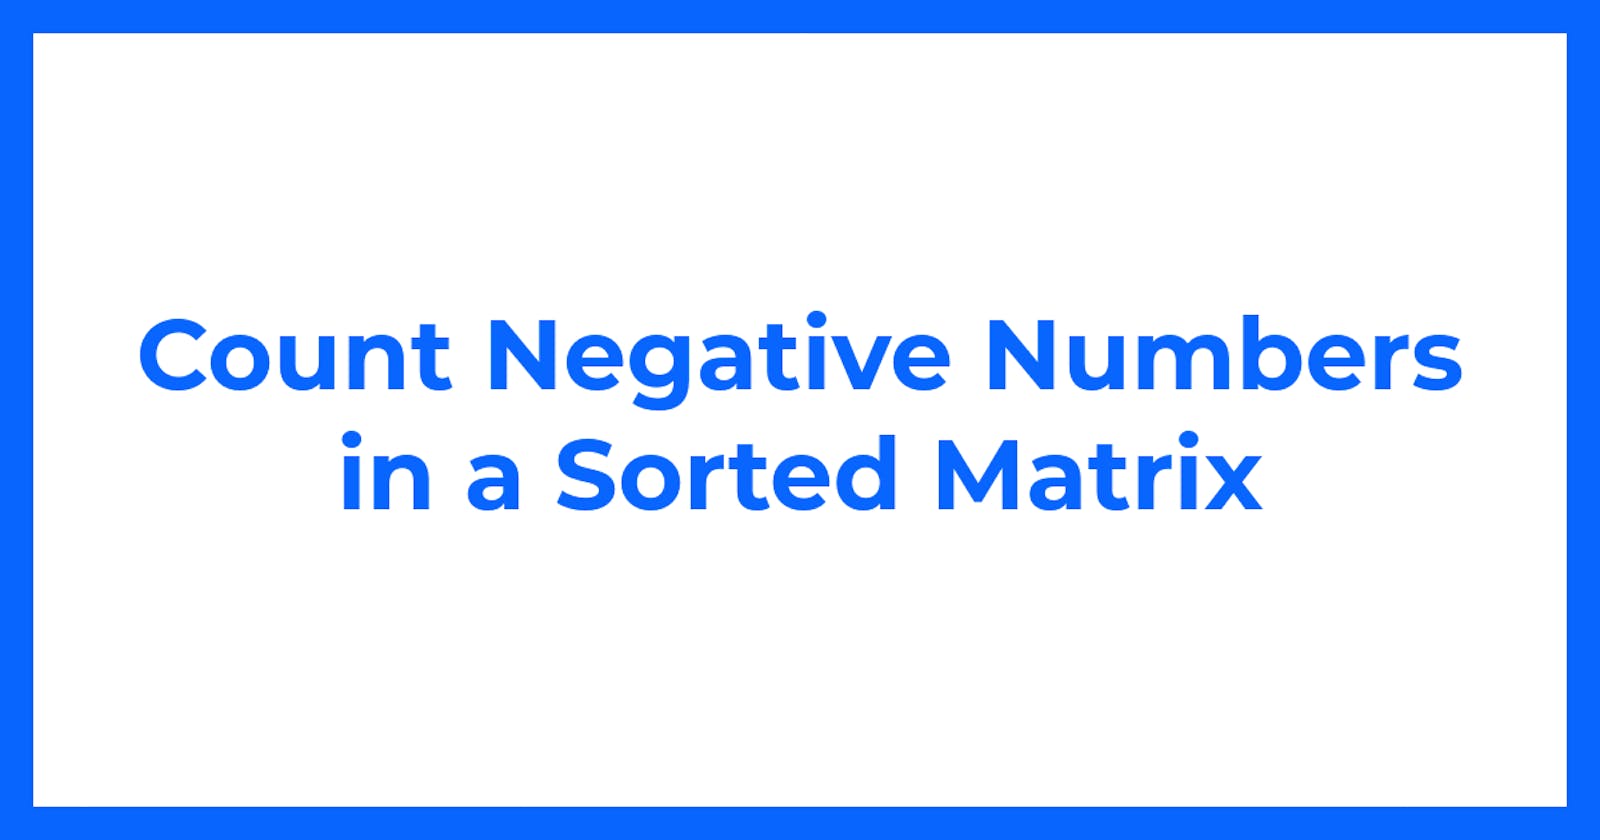 Count Negative Numbers in a Sorted Matrix